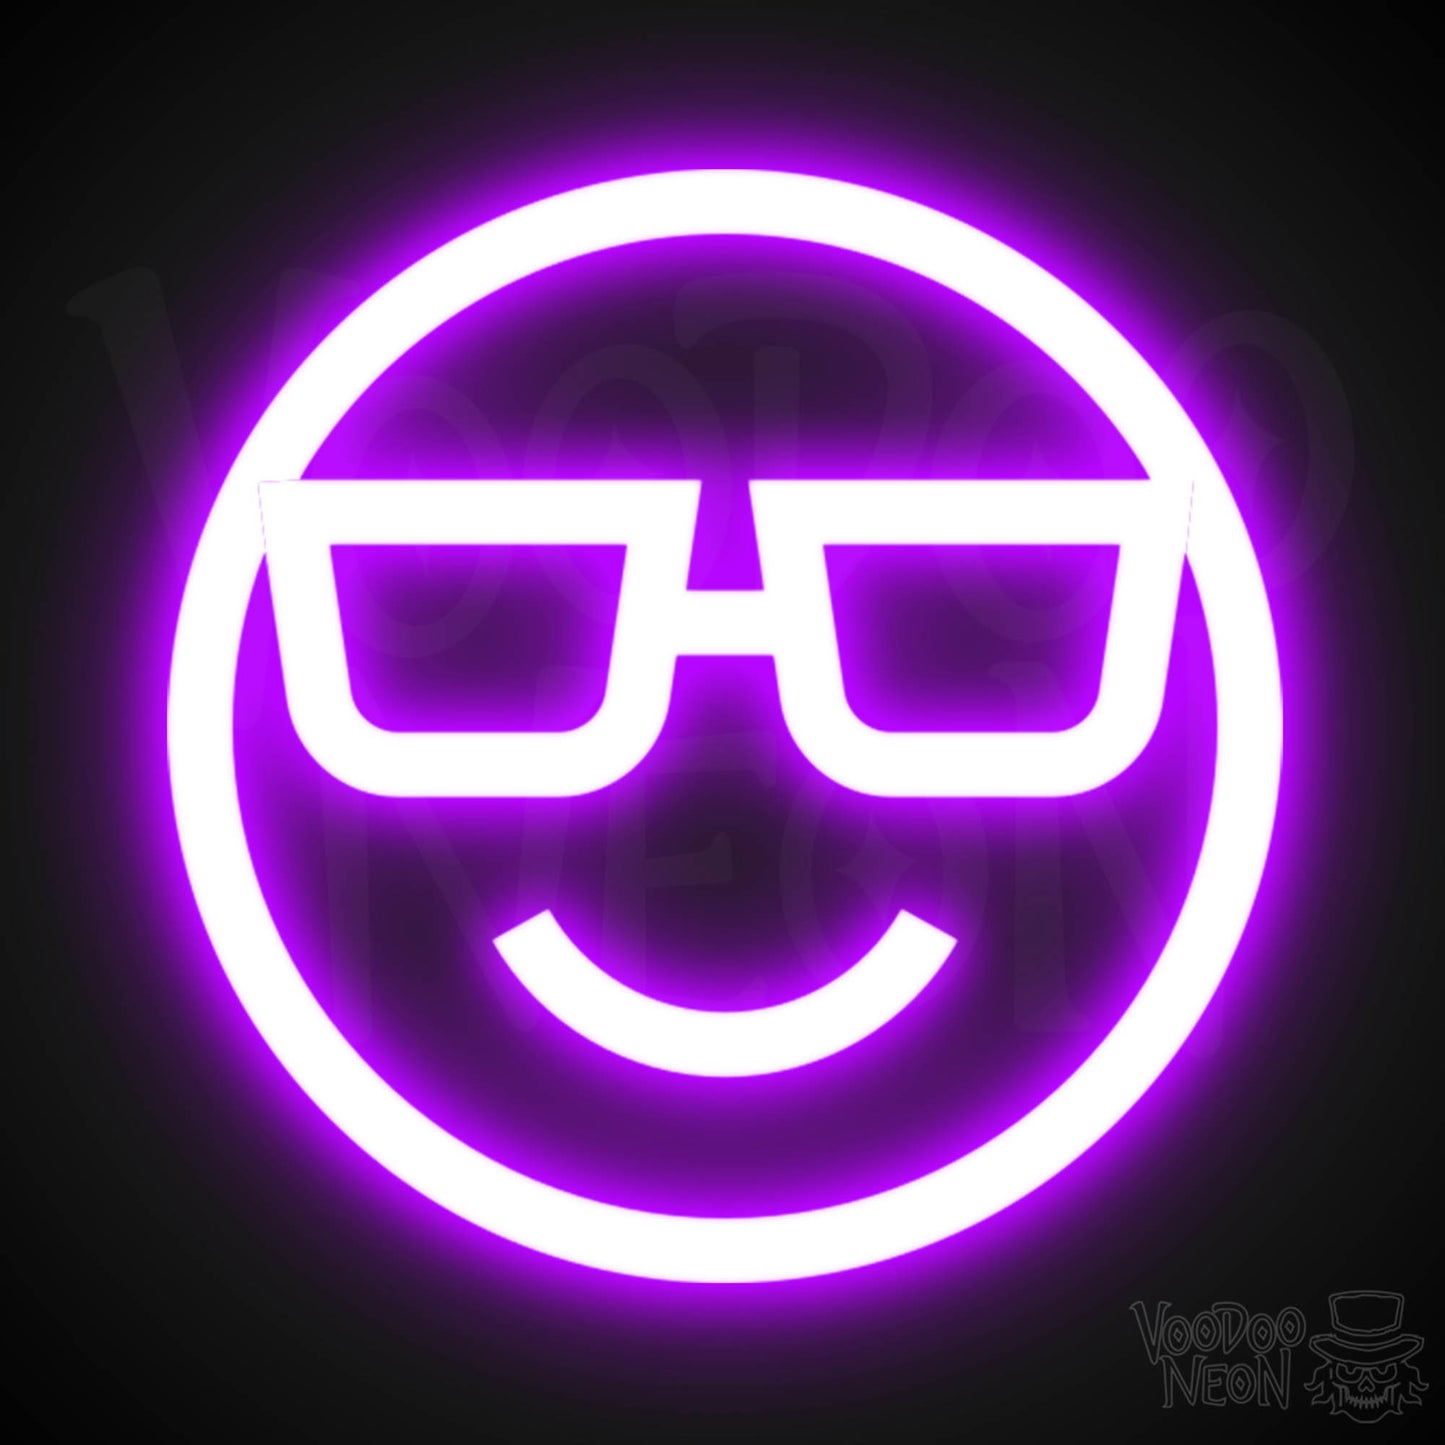 Neon Smiley Face - Smiley Face Neon Sign - LED Wall Art - Color Purple